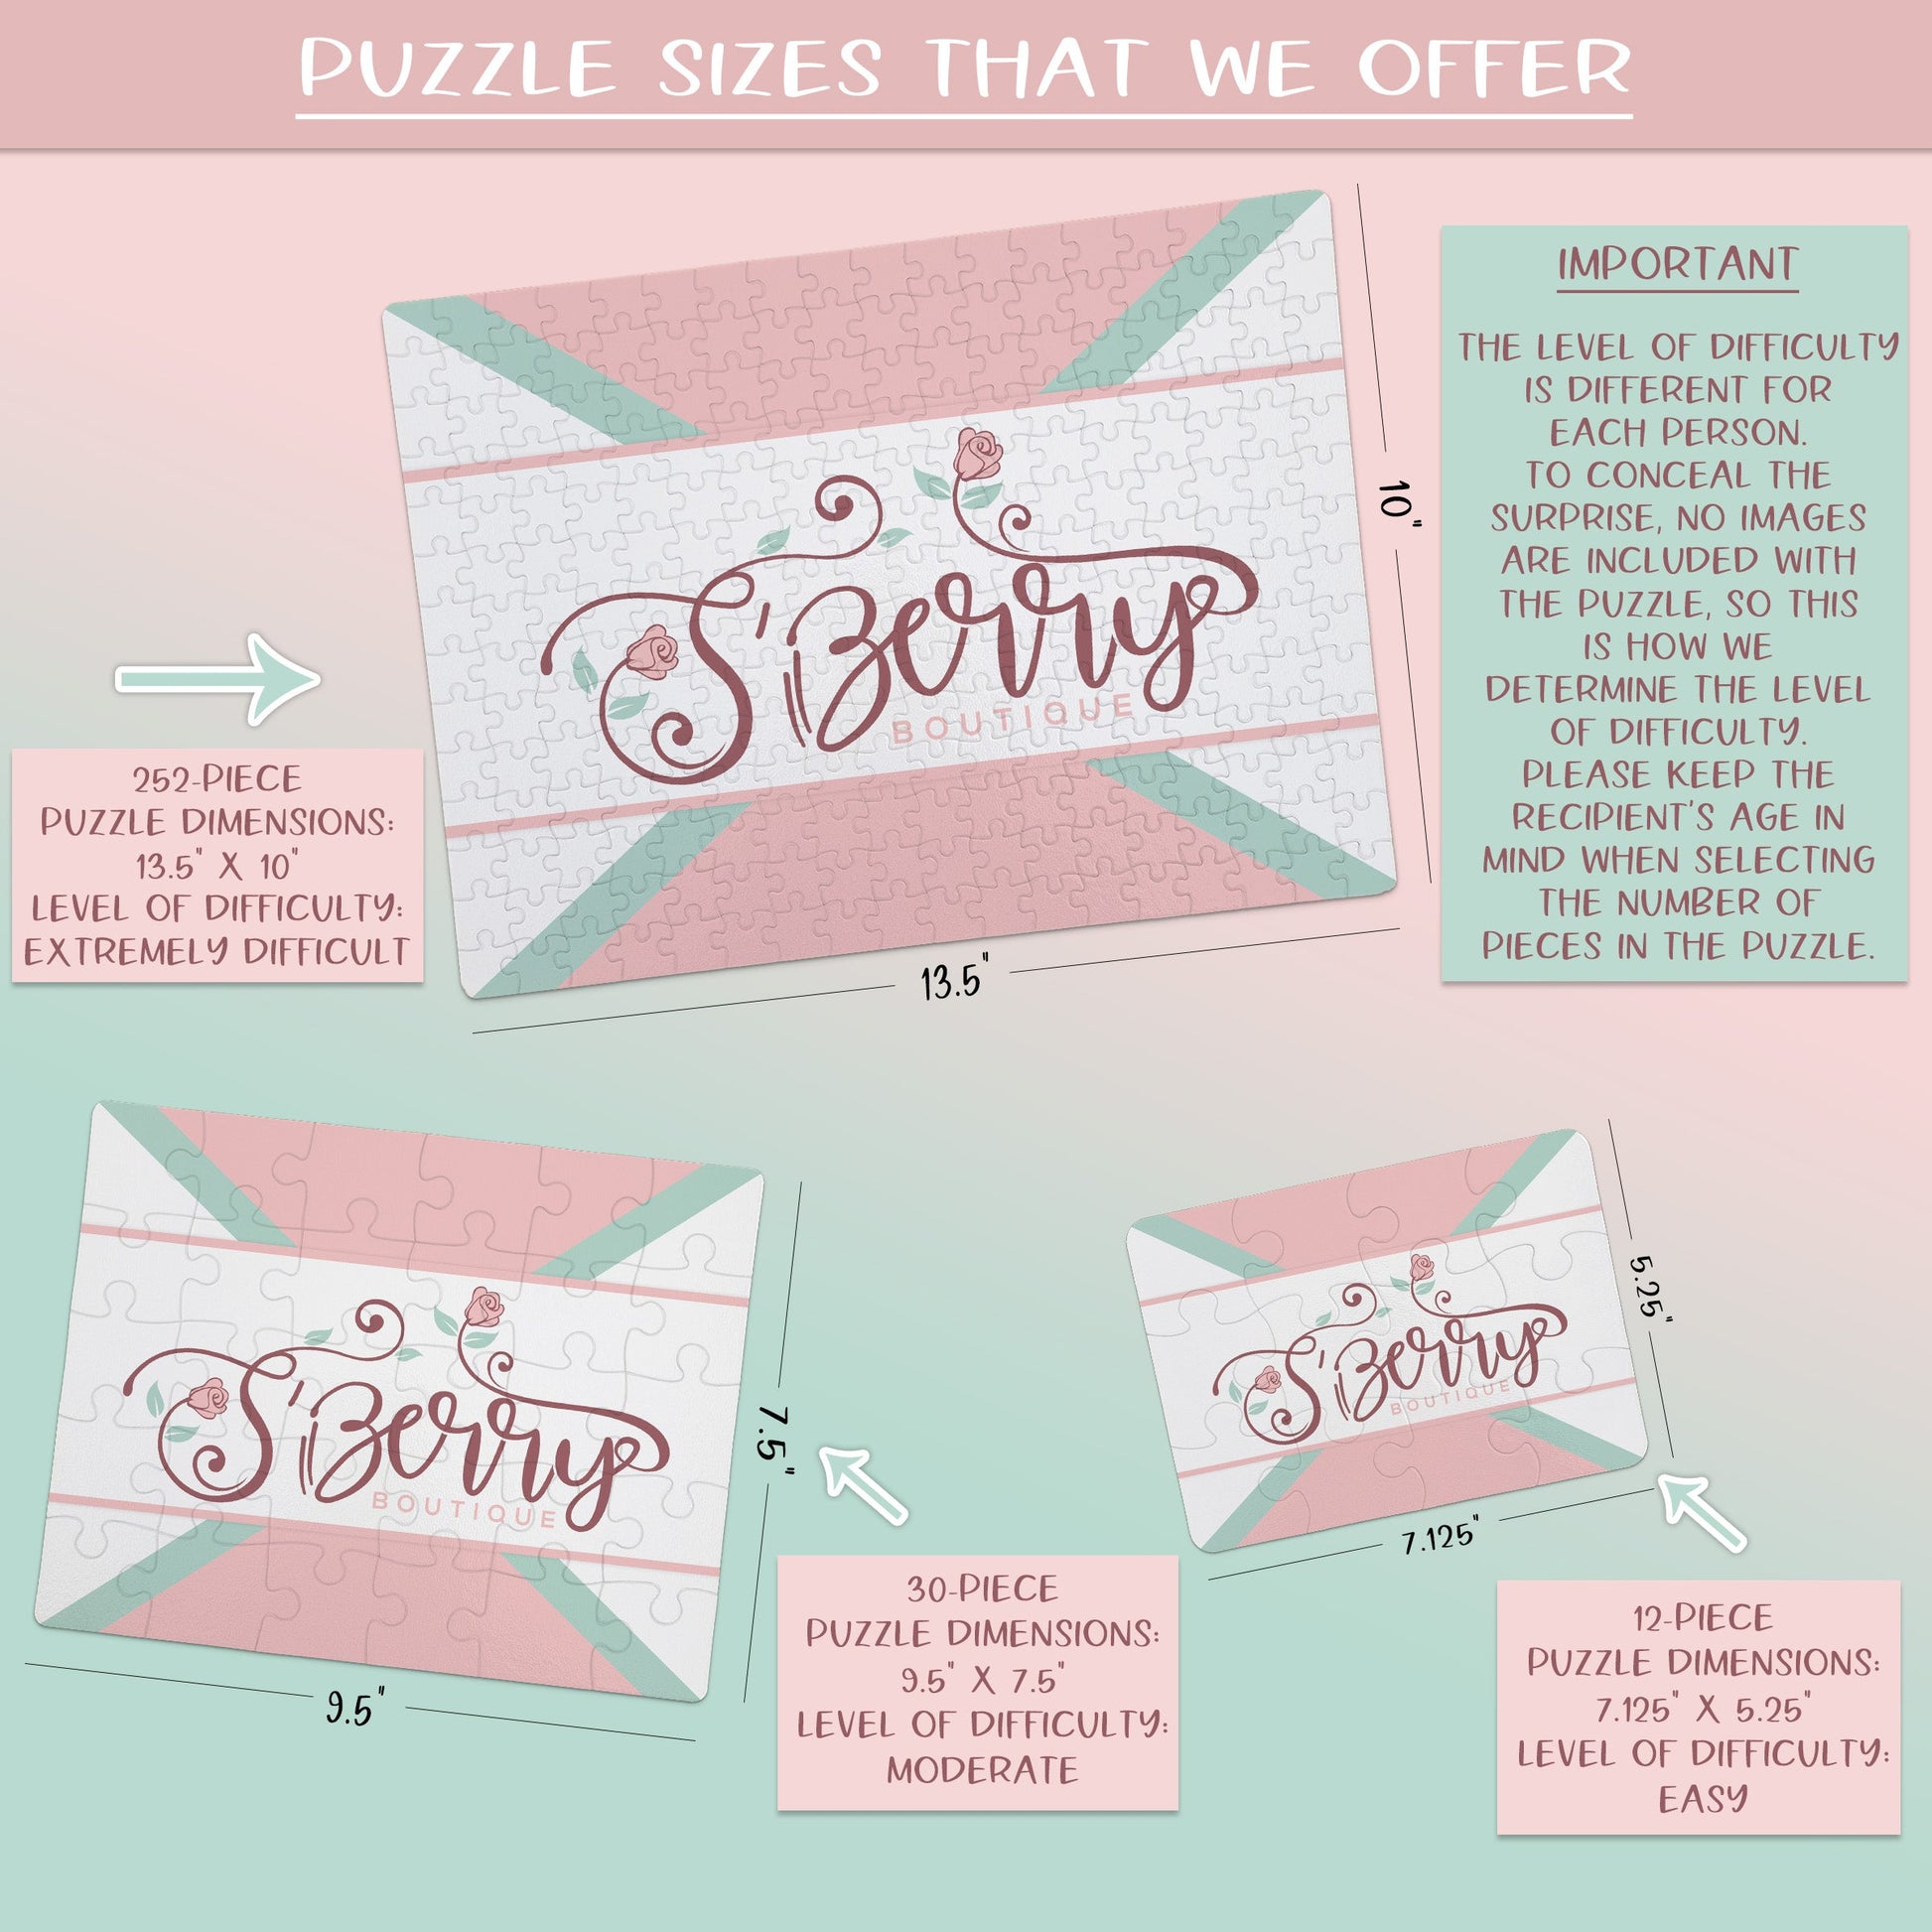 Create Your Own Puzzle - Hot Air Balloon - CYOP0143 | S'Berry Boutique